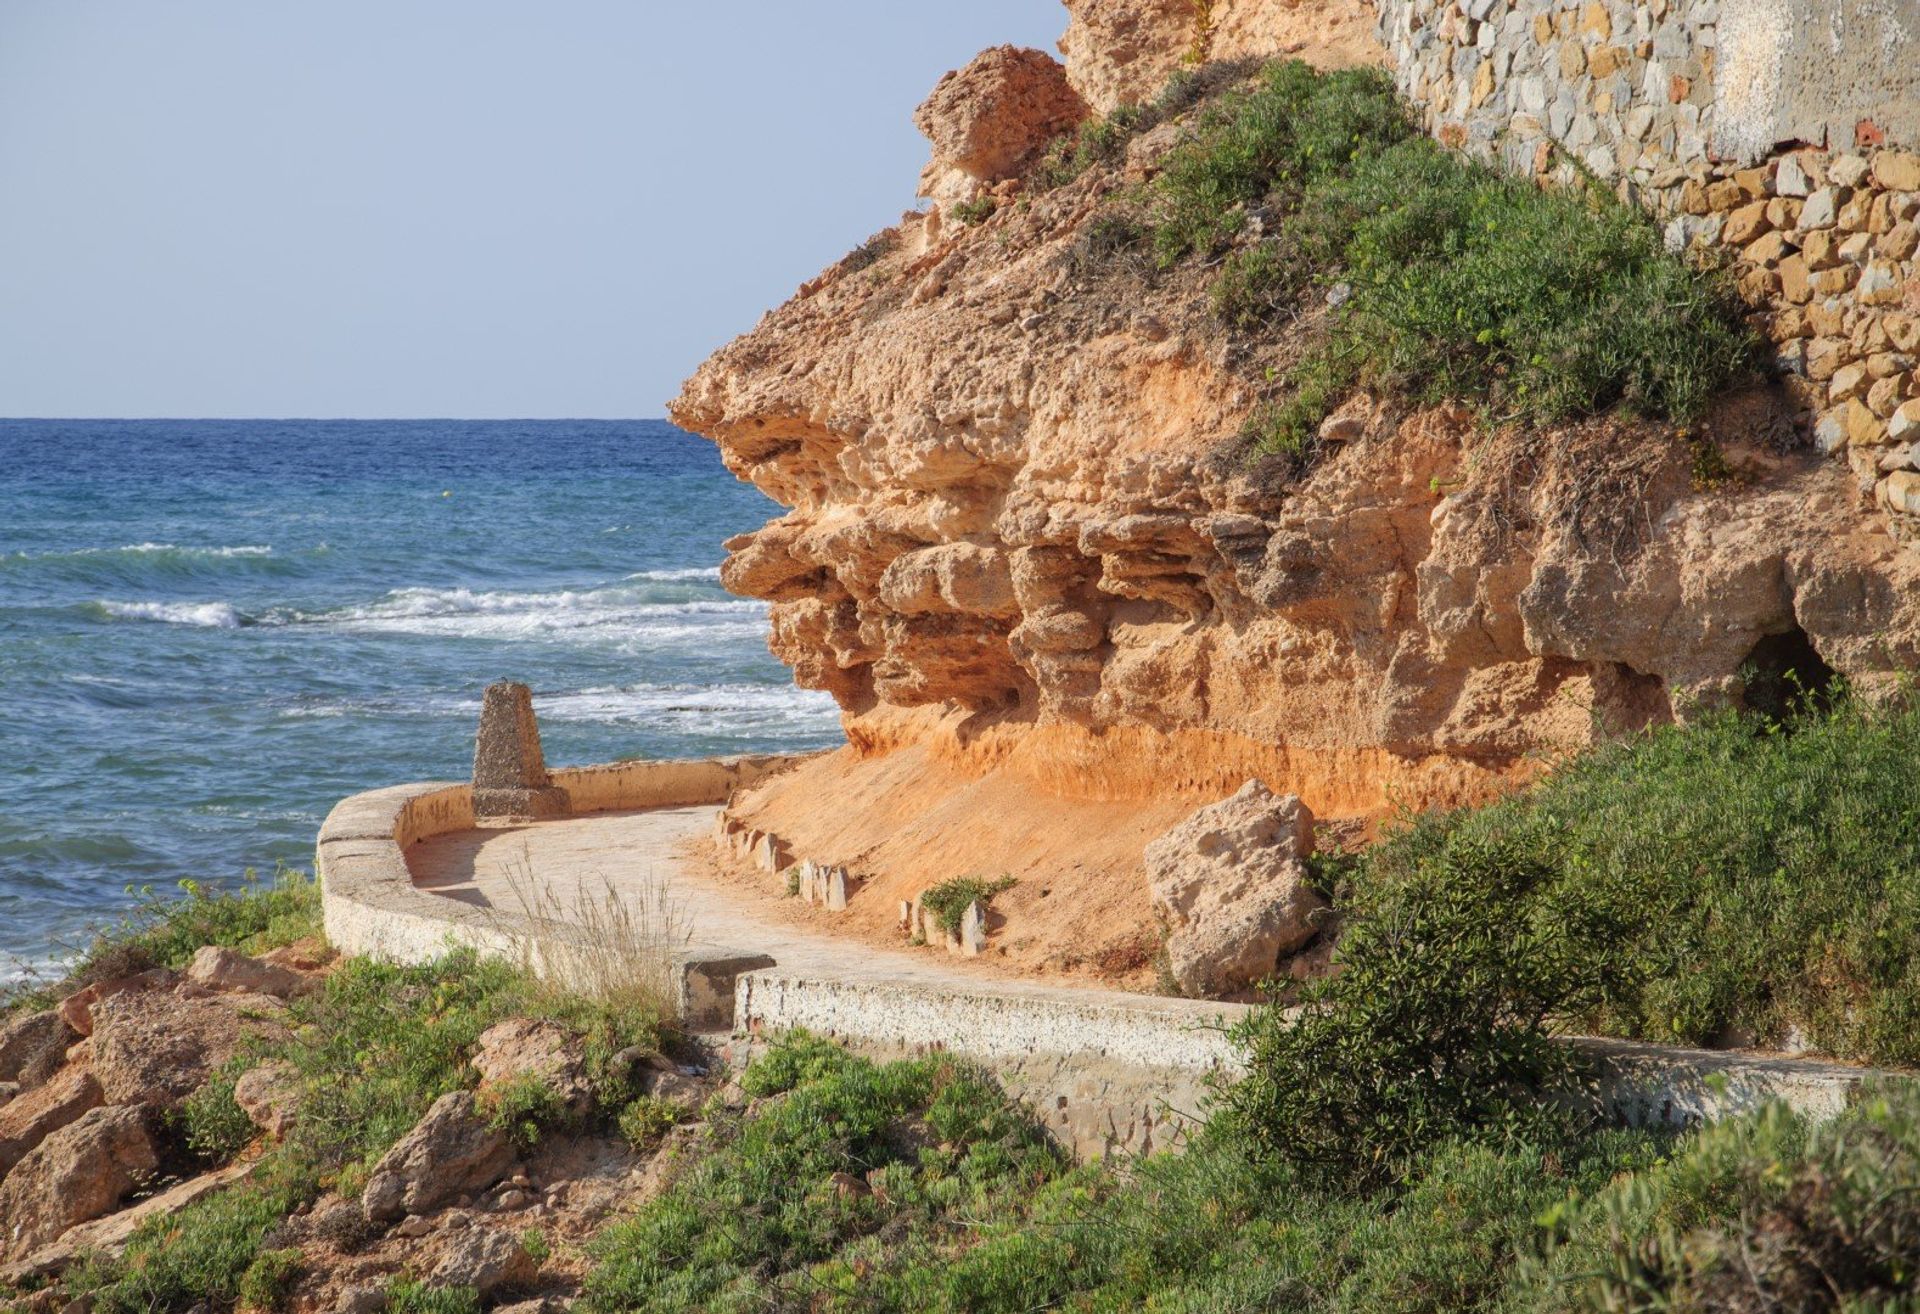 A path along La Zenia's coastline is a perfect place to explore its hidden coves and cliffs with beautiful views of the Mediterranean